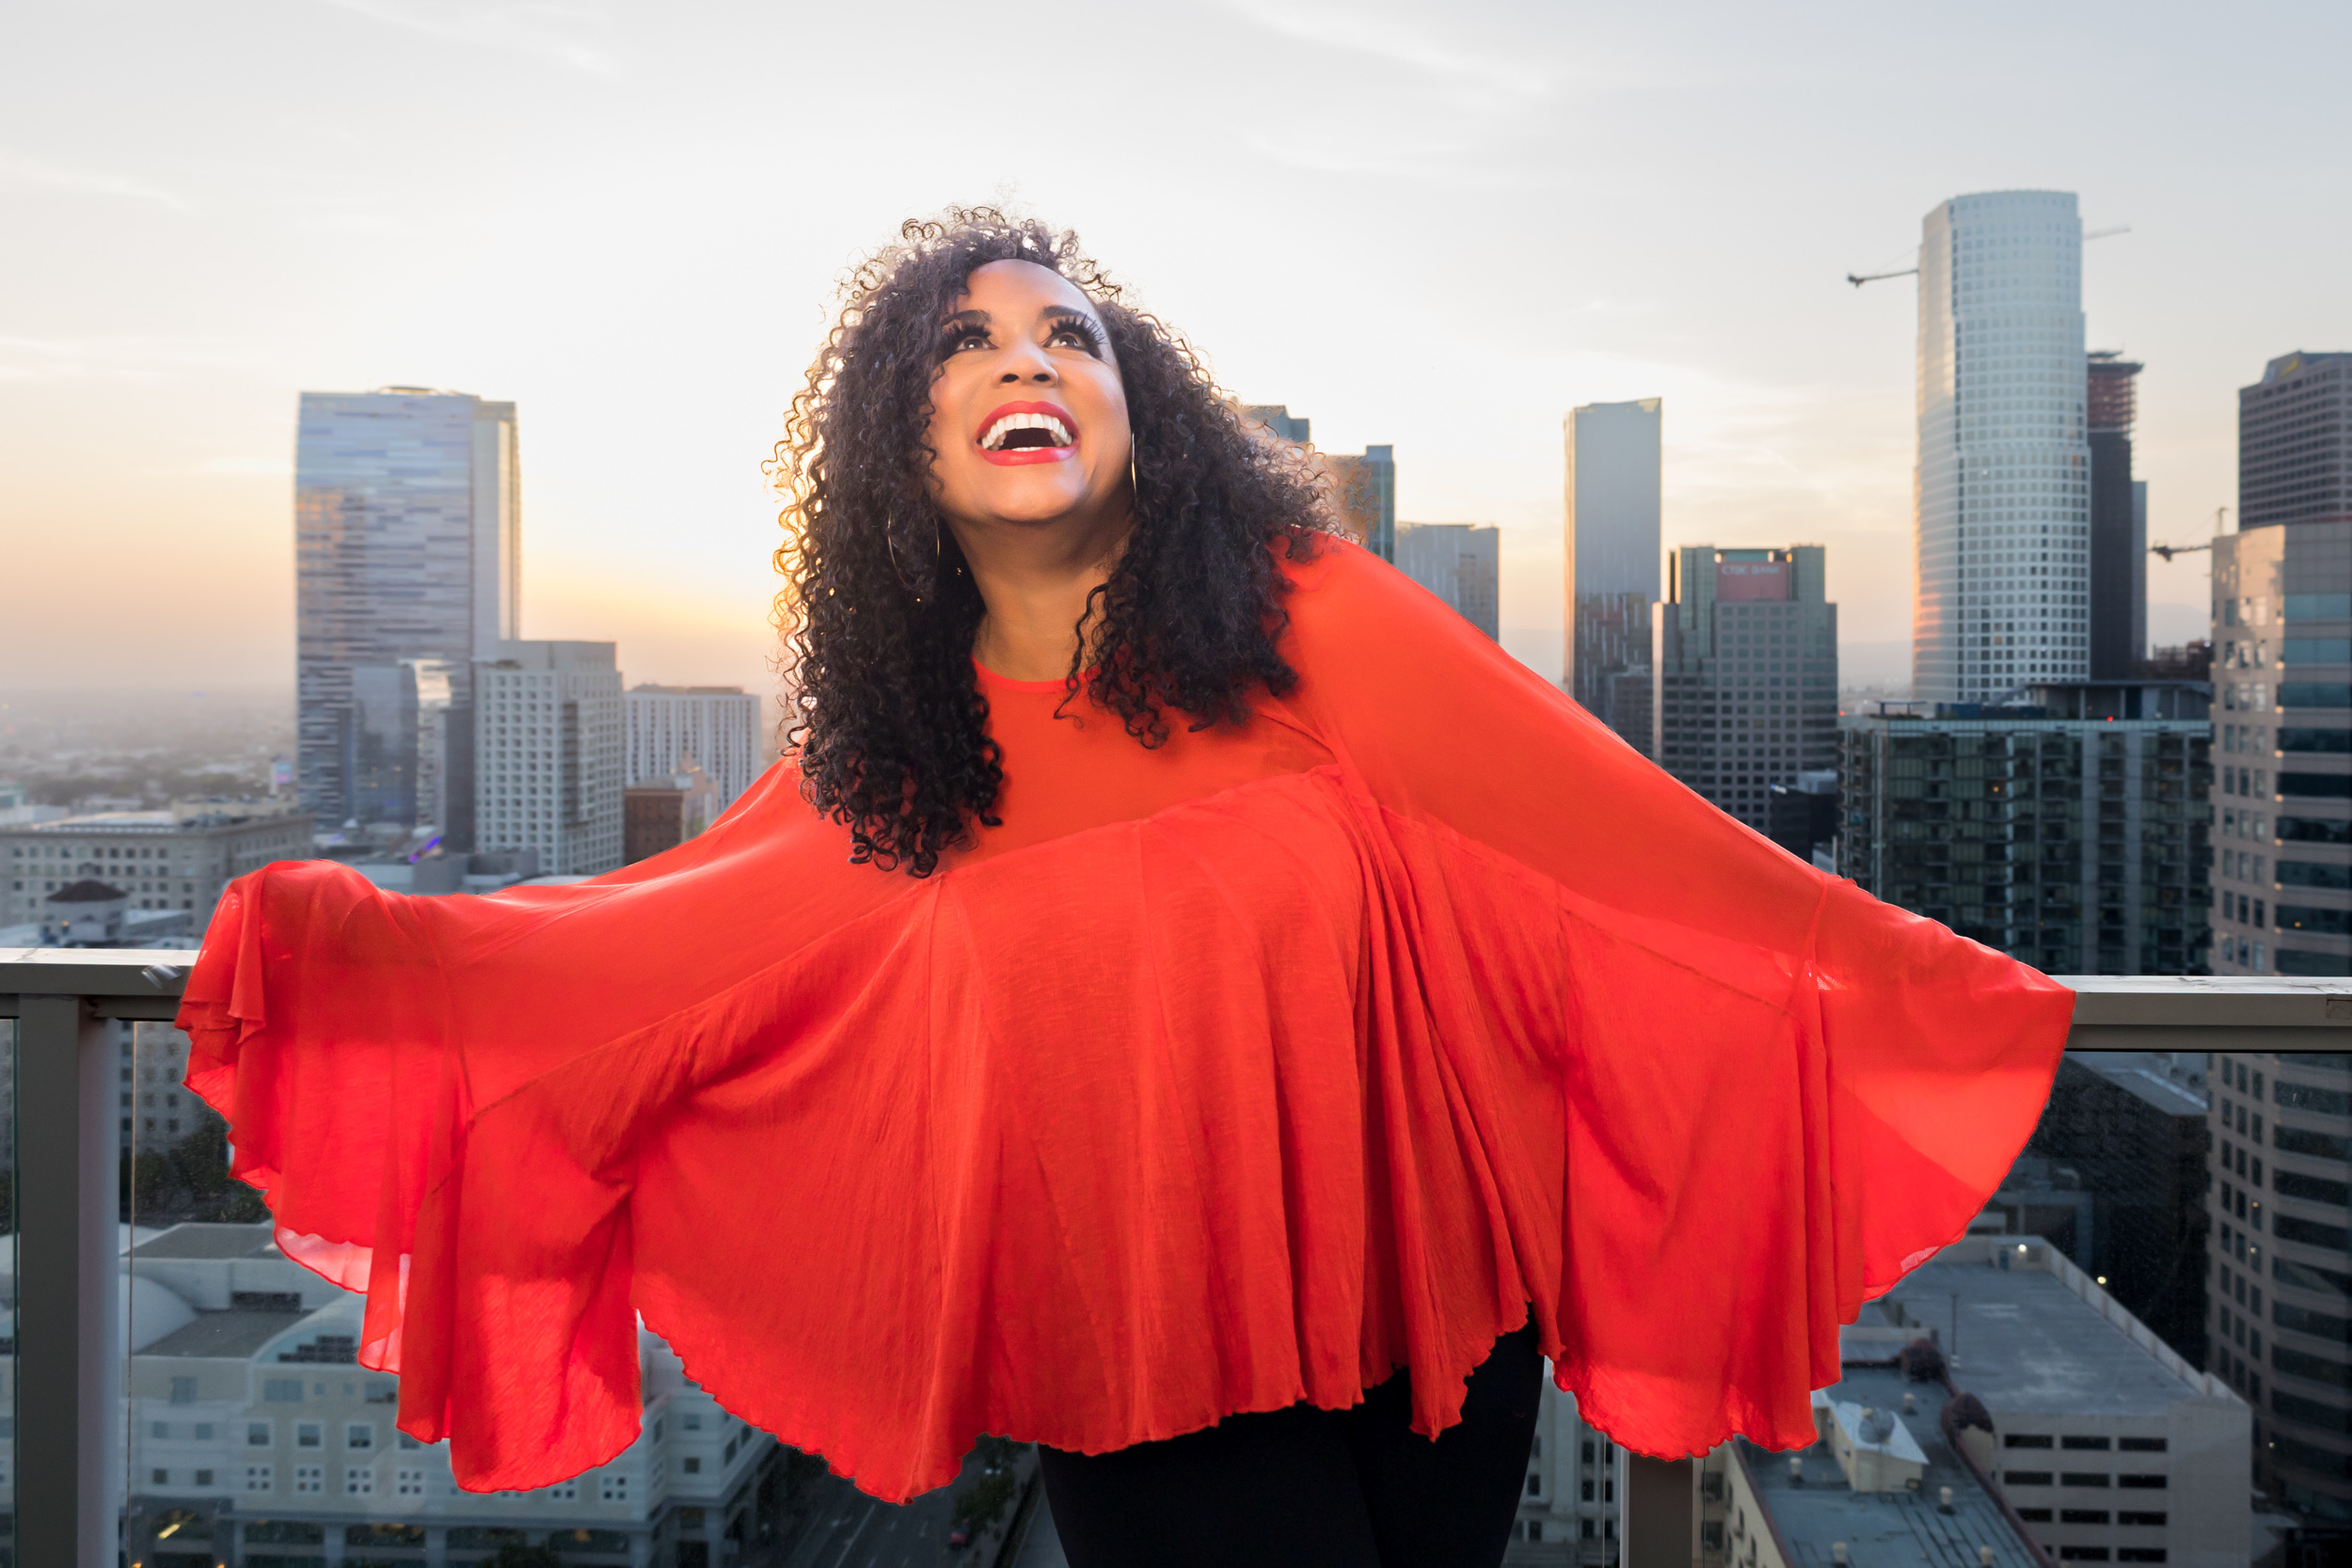 Sultry Jazz Sensation Sharon Marie Cline Set to Release Romantic Single "Summer Love"